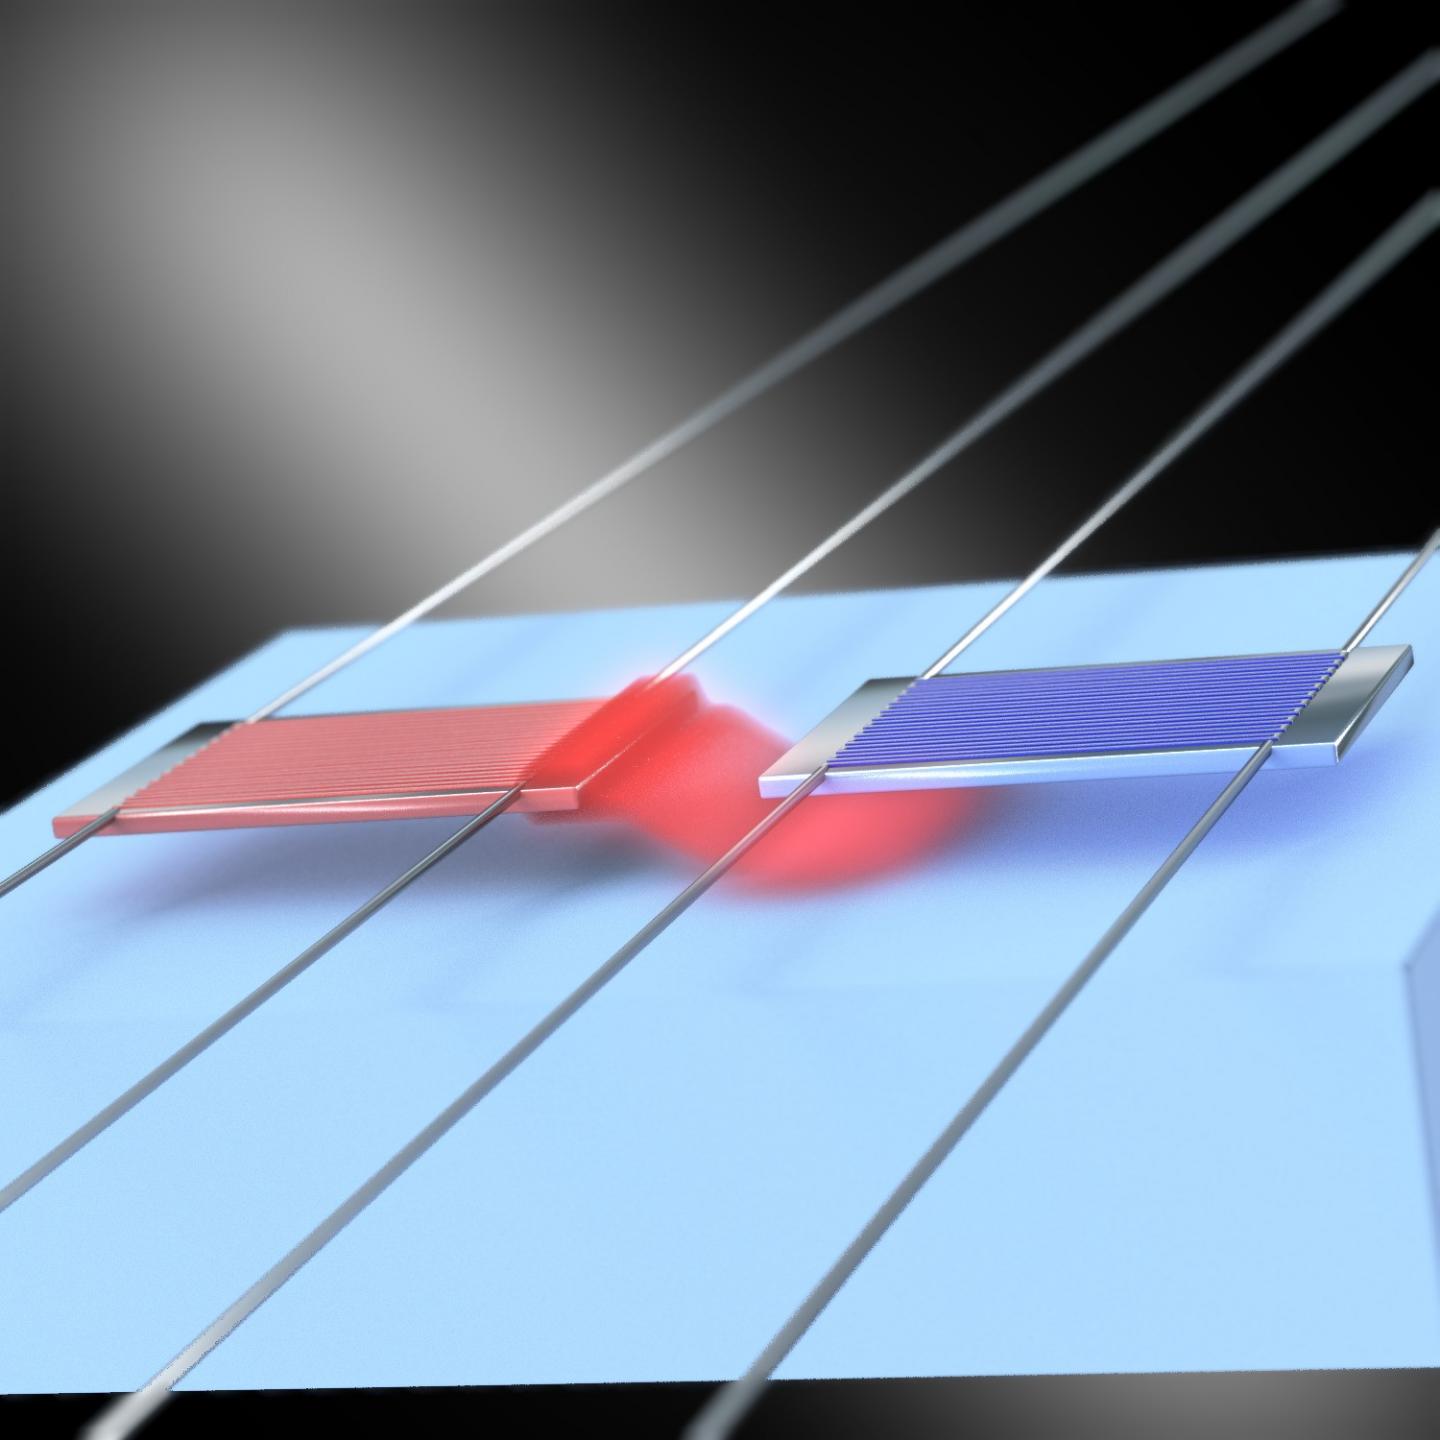 Nanoscale Thermal Switches